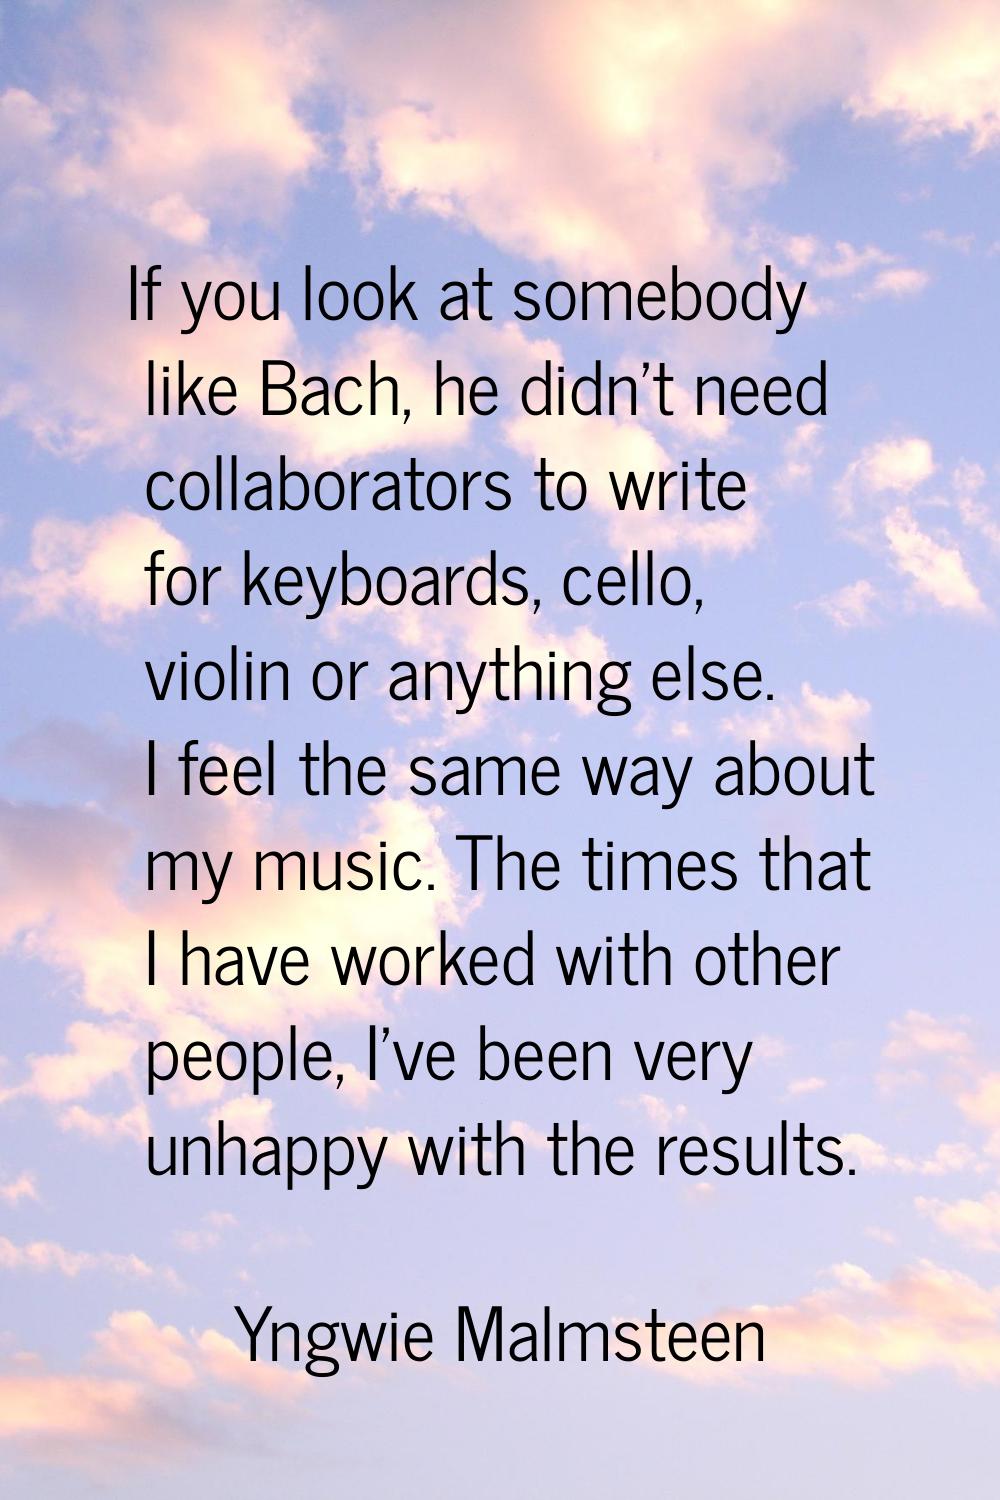 If you look at somebody like Bach, he didn't need collaborators to write for keyboards, cello, viol